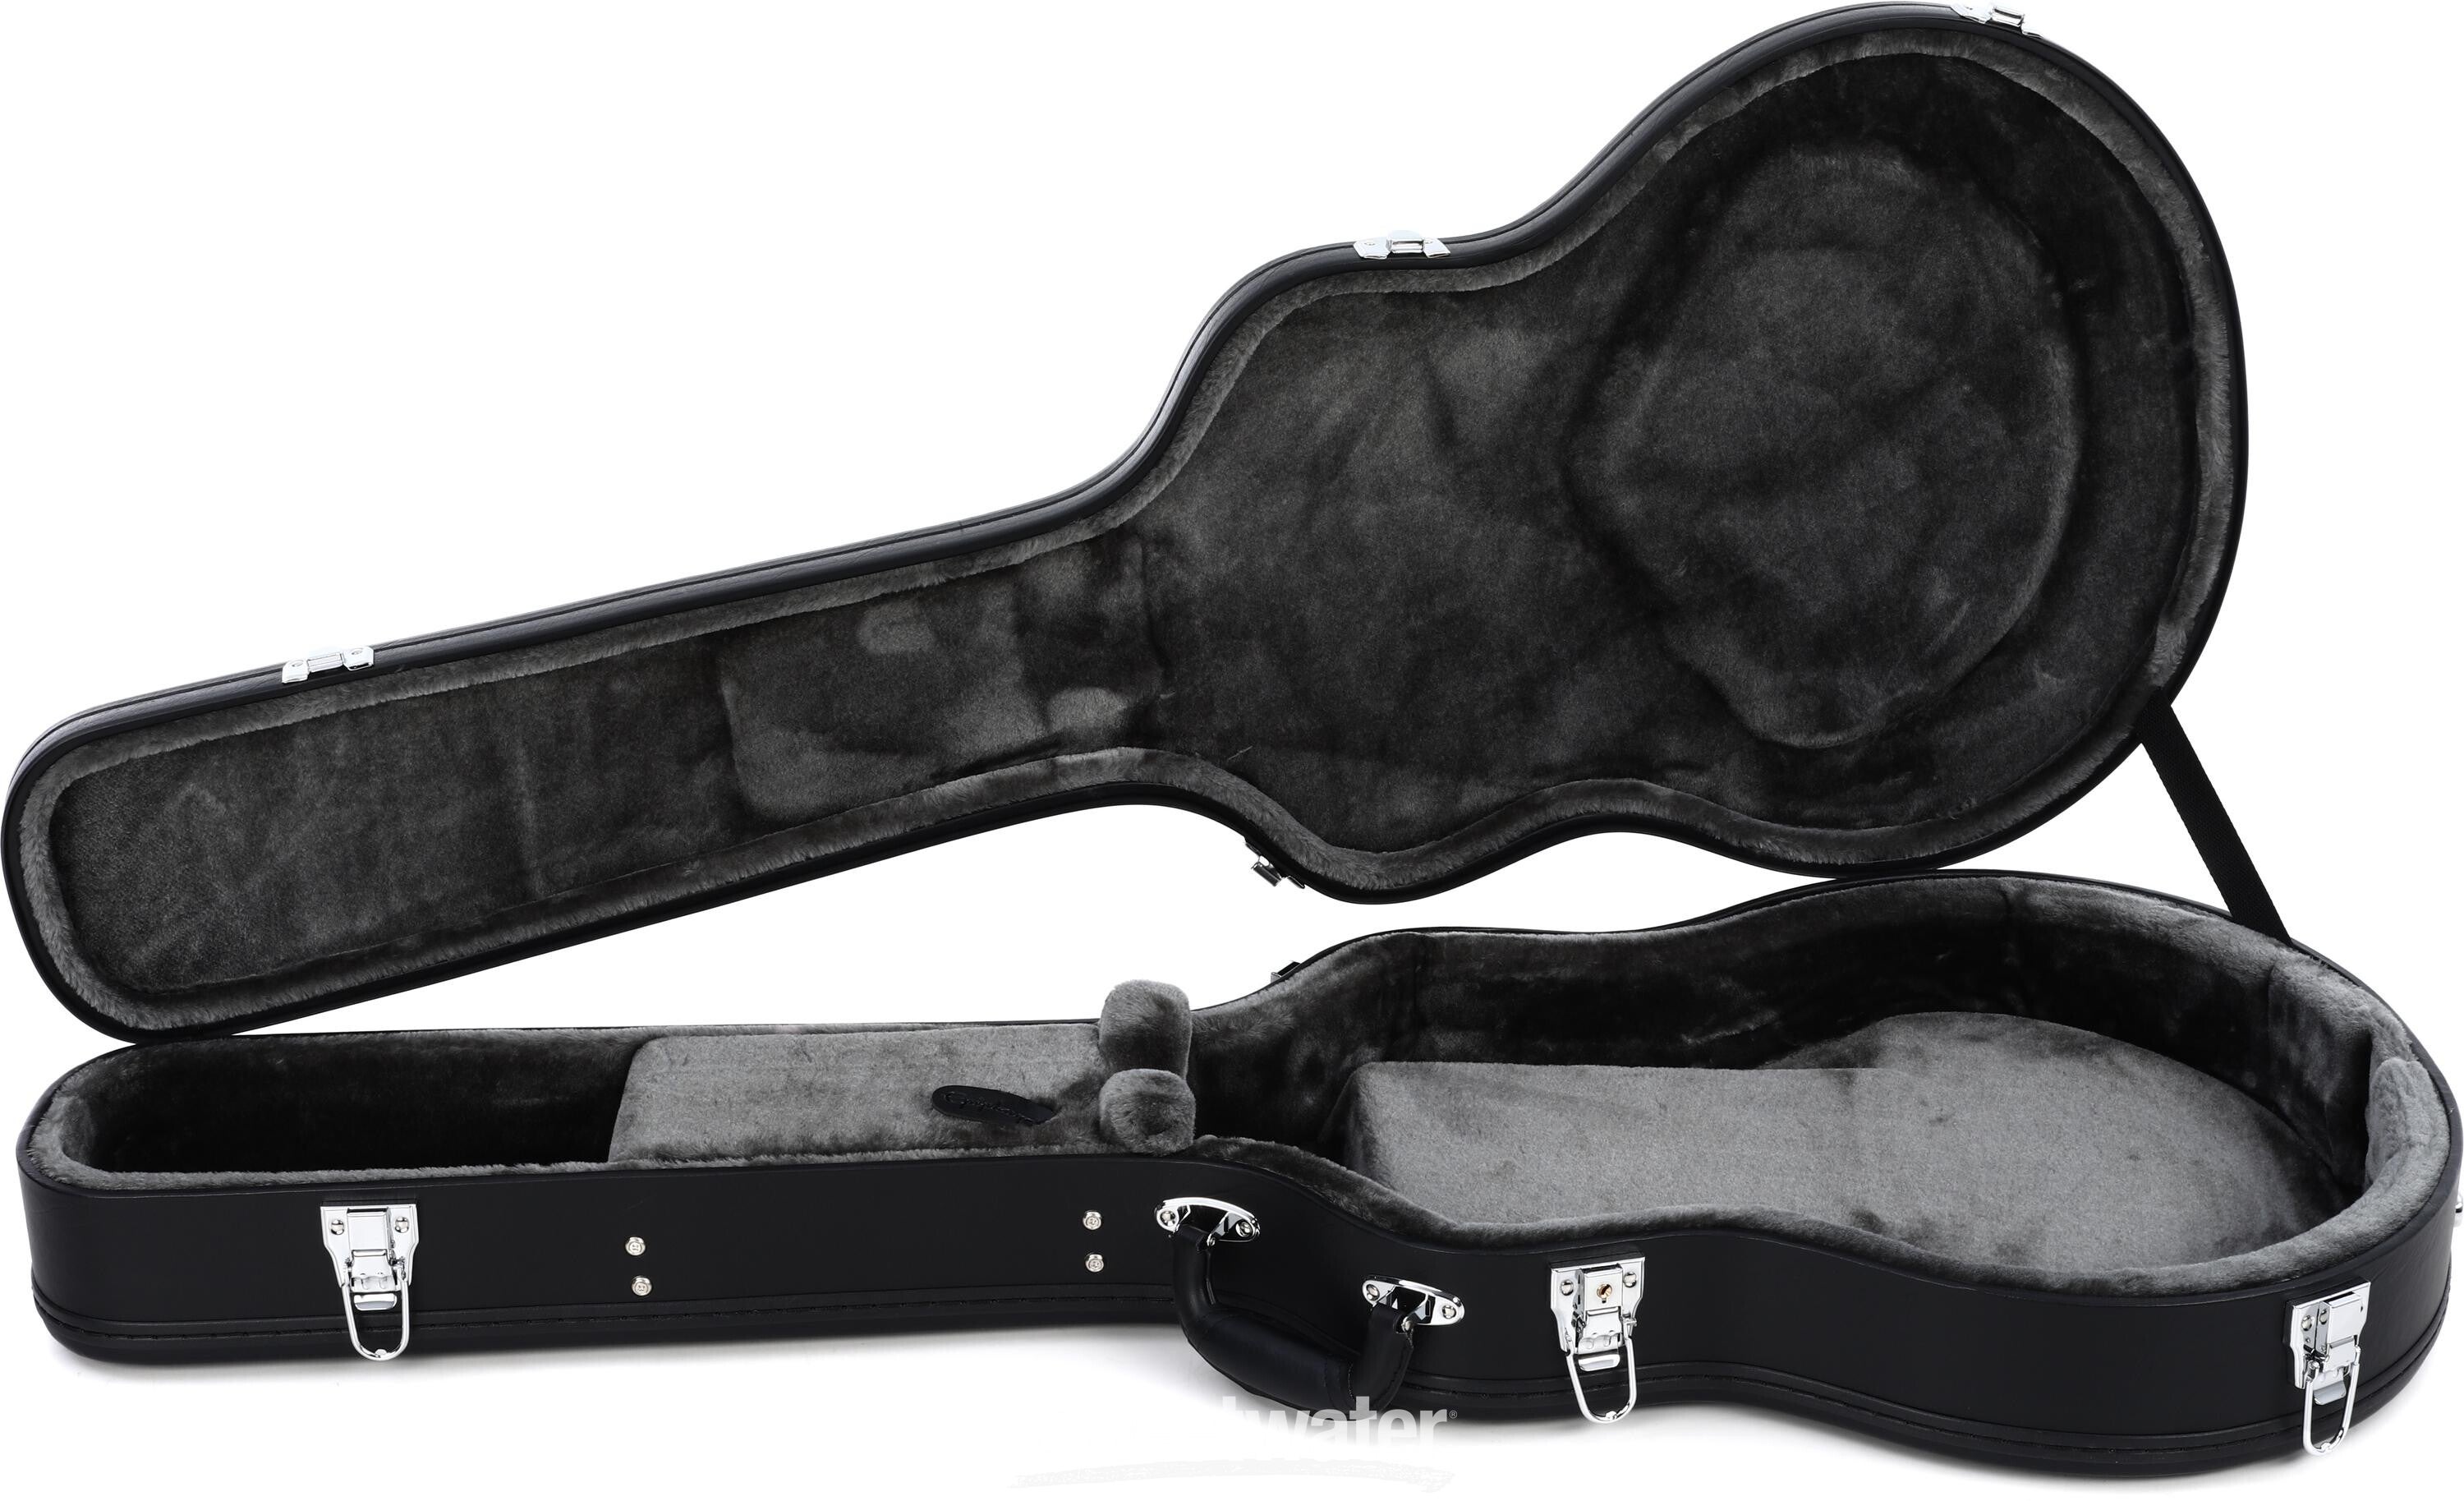 Epiphone E519 Hollowbody Guitar Case Reviews | Sweetwater